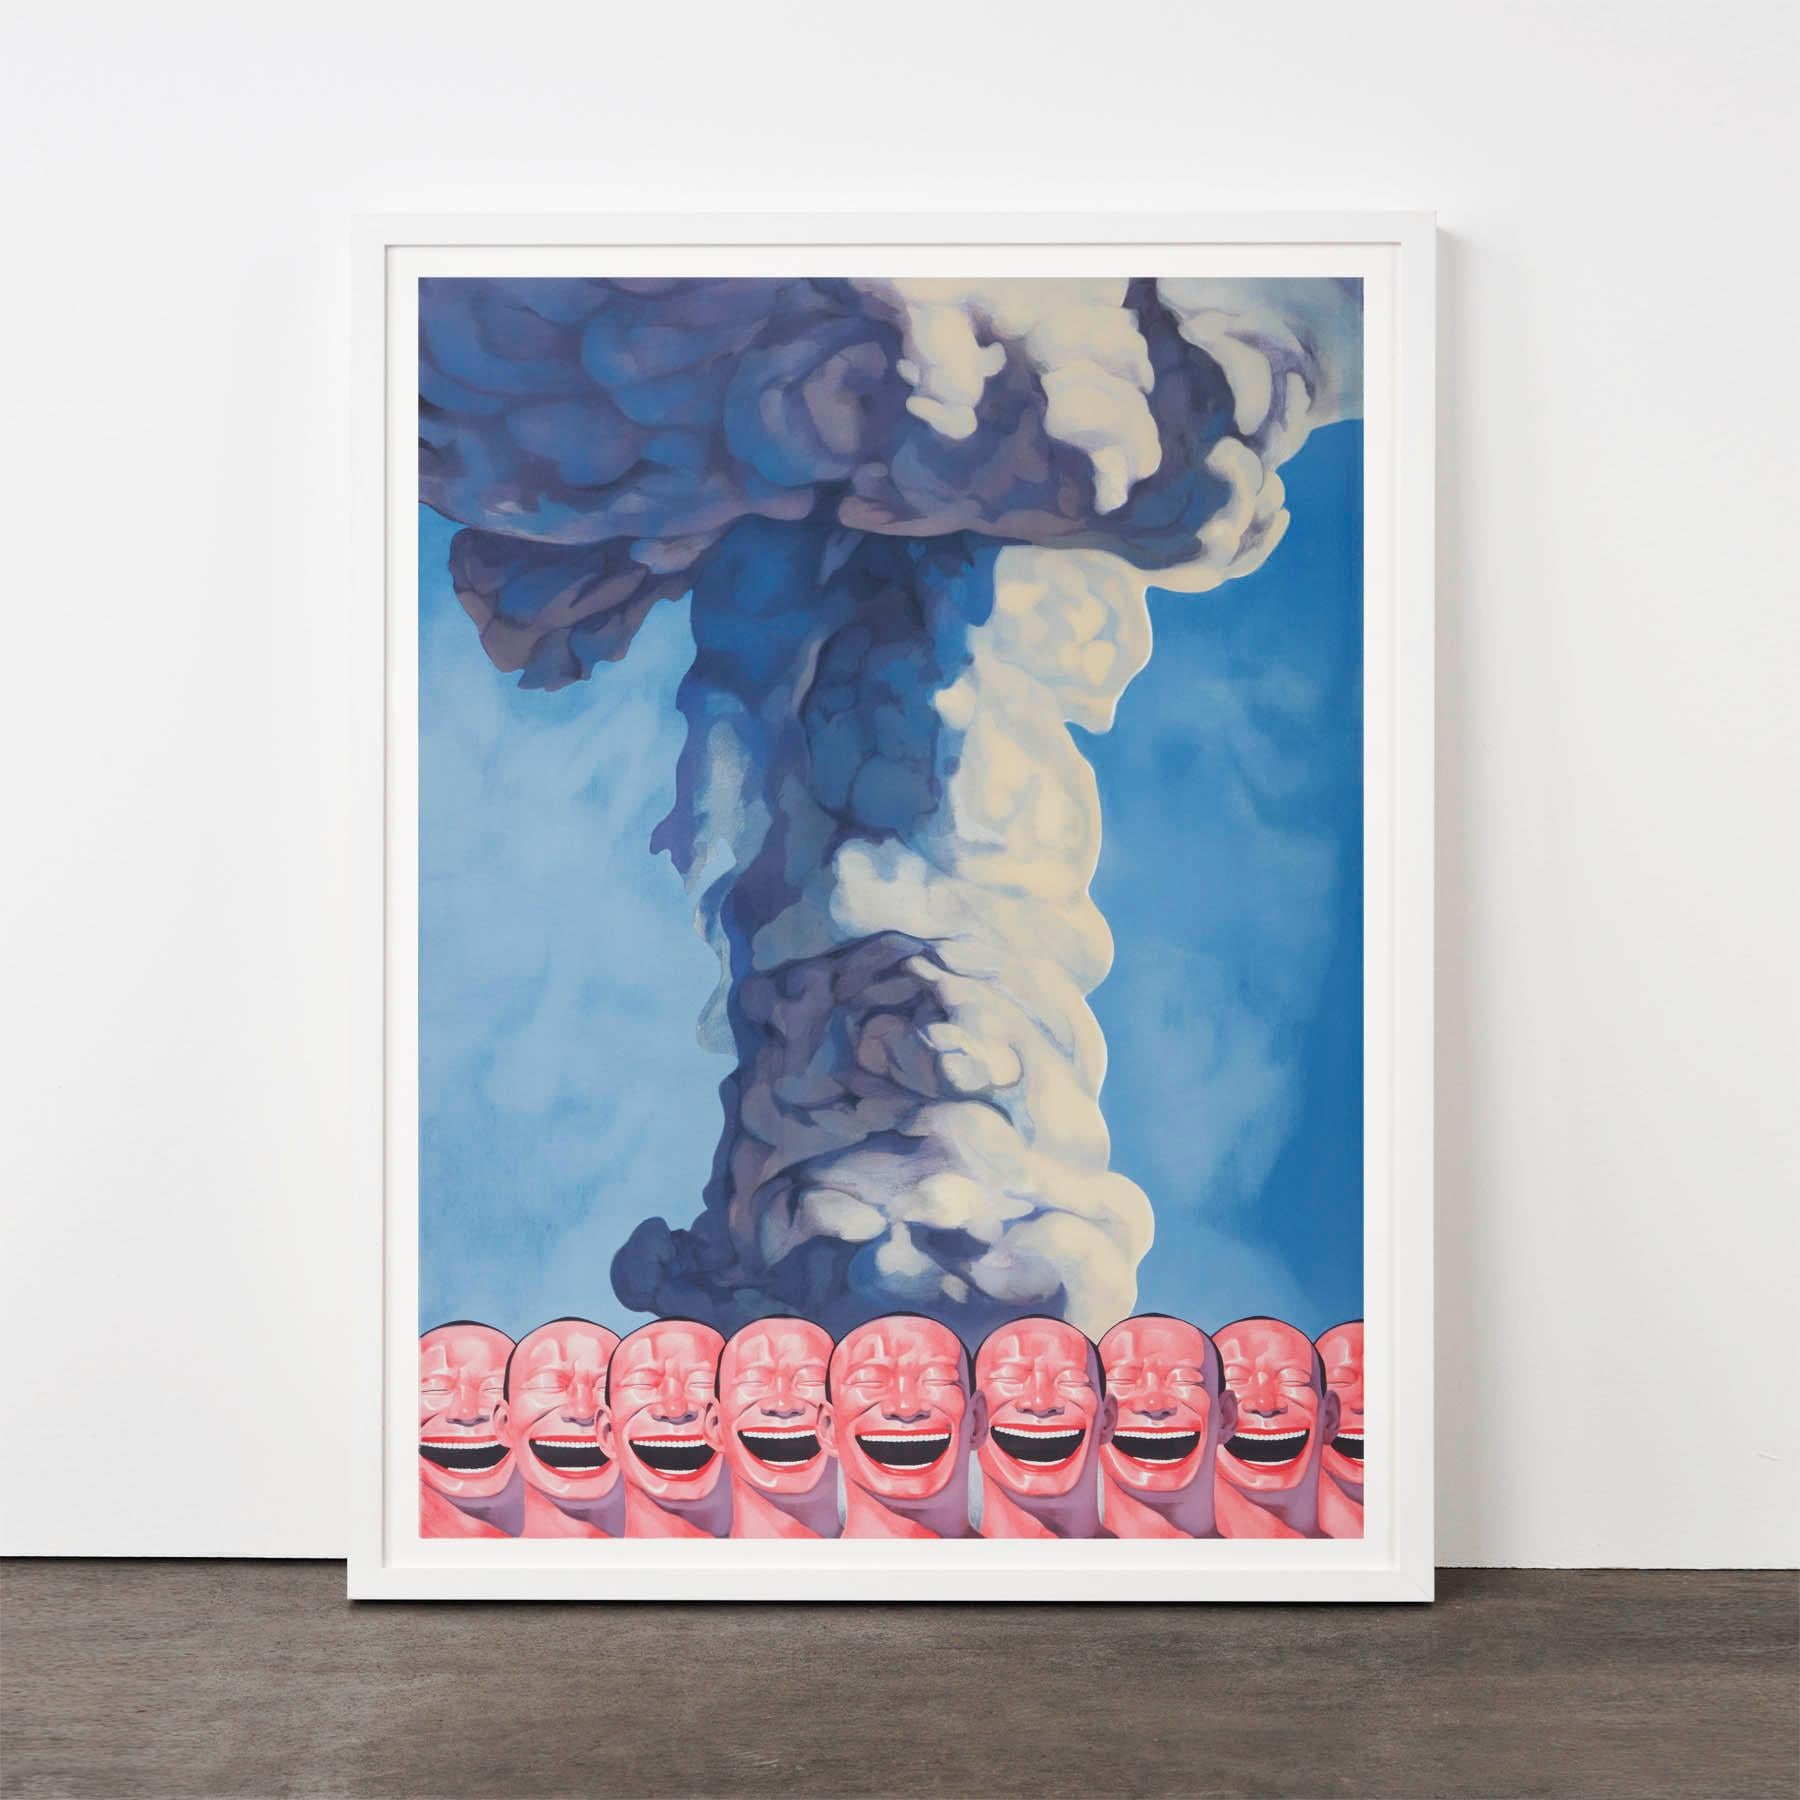 Mushroom Cloud, Yue Minjun- Art, Lithograph, Limited Edition, Chinese For Sale 1